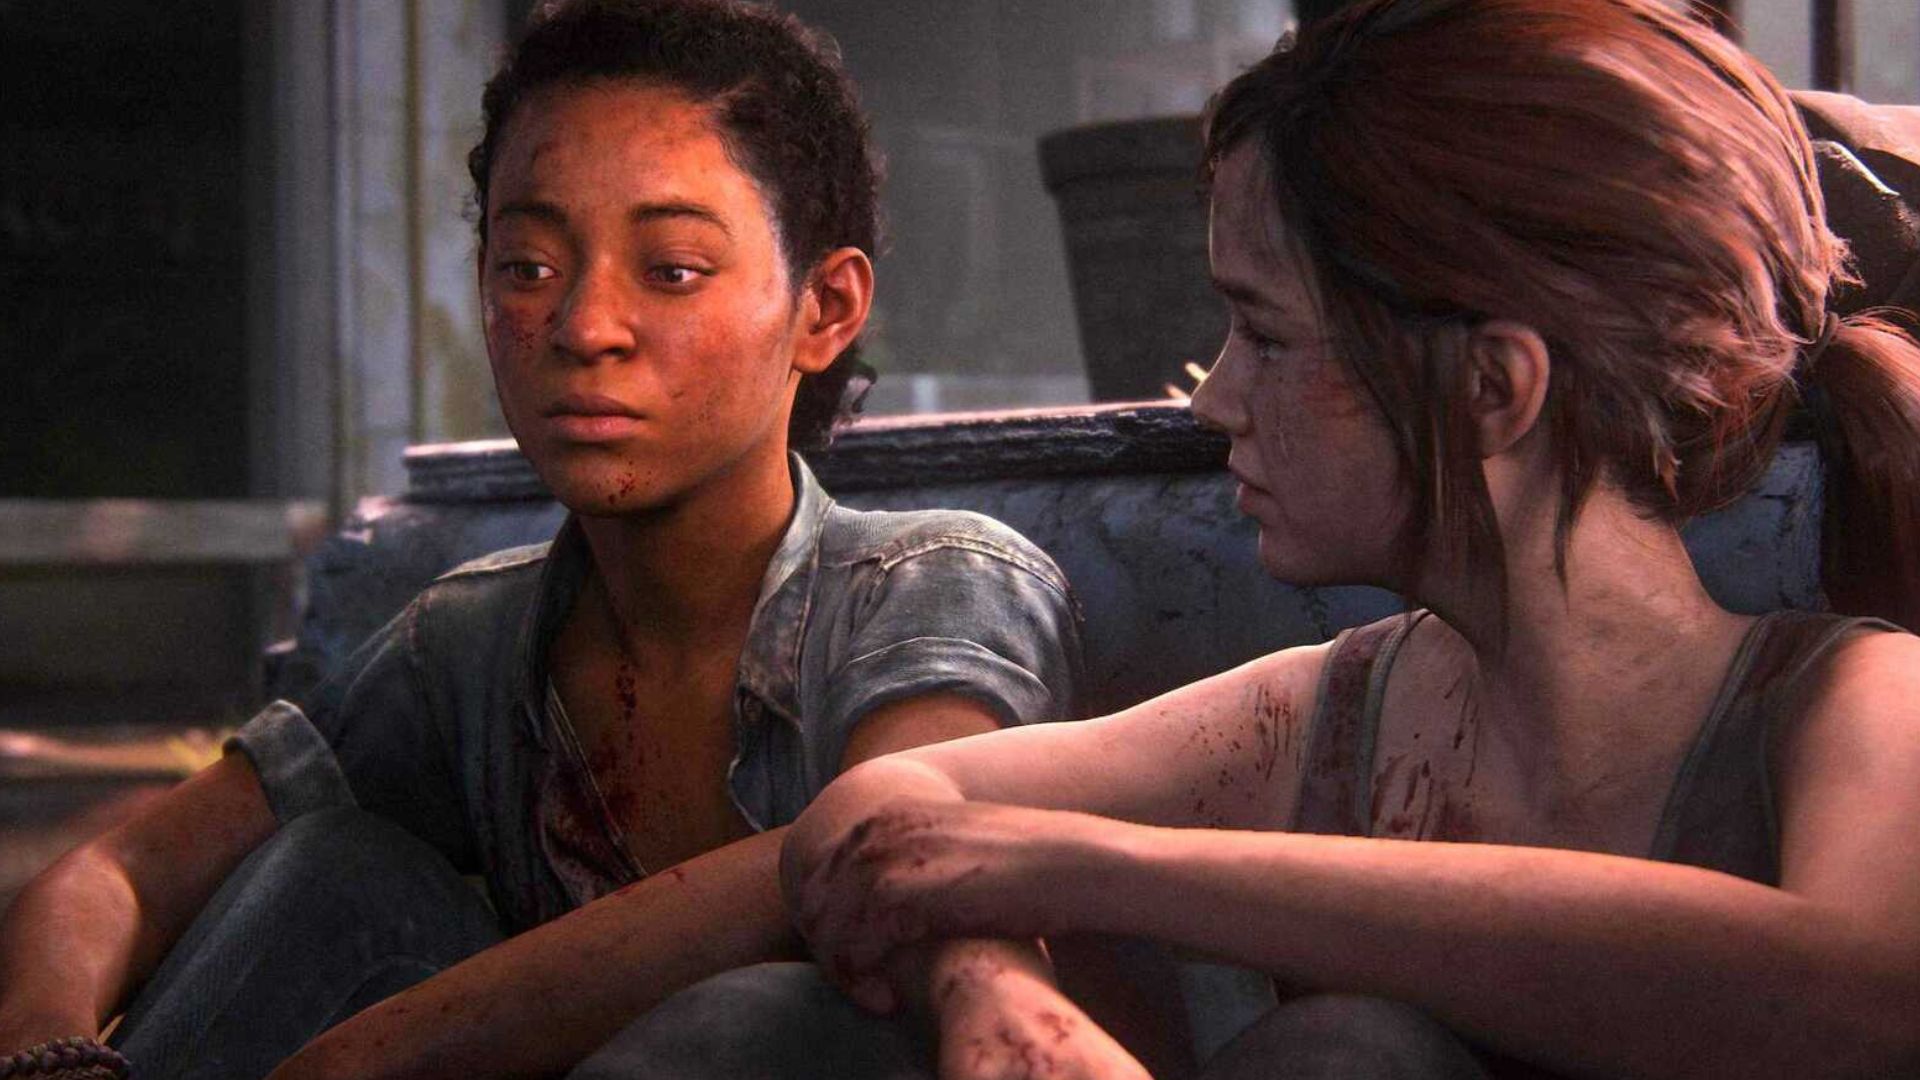 We play The Last of Us in realistic mode: diving into Left Behind after episode 7 of HBO